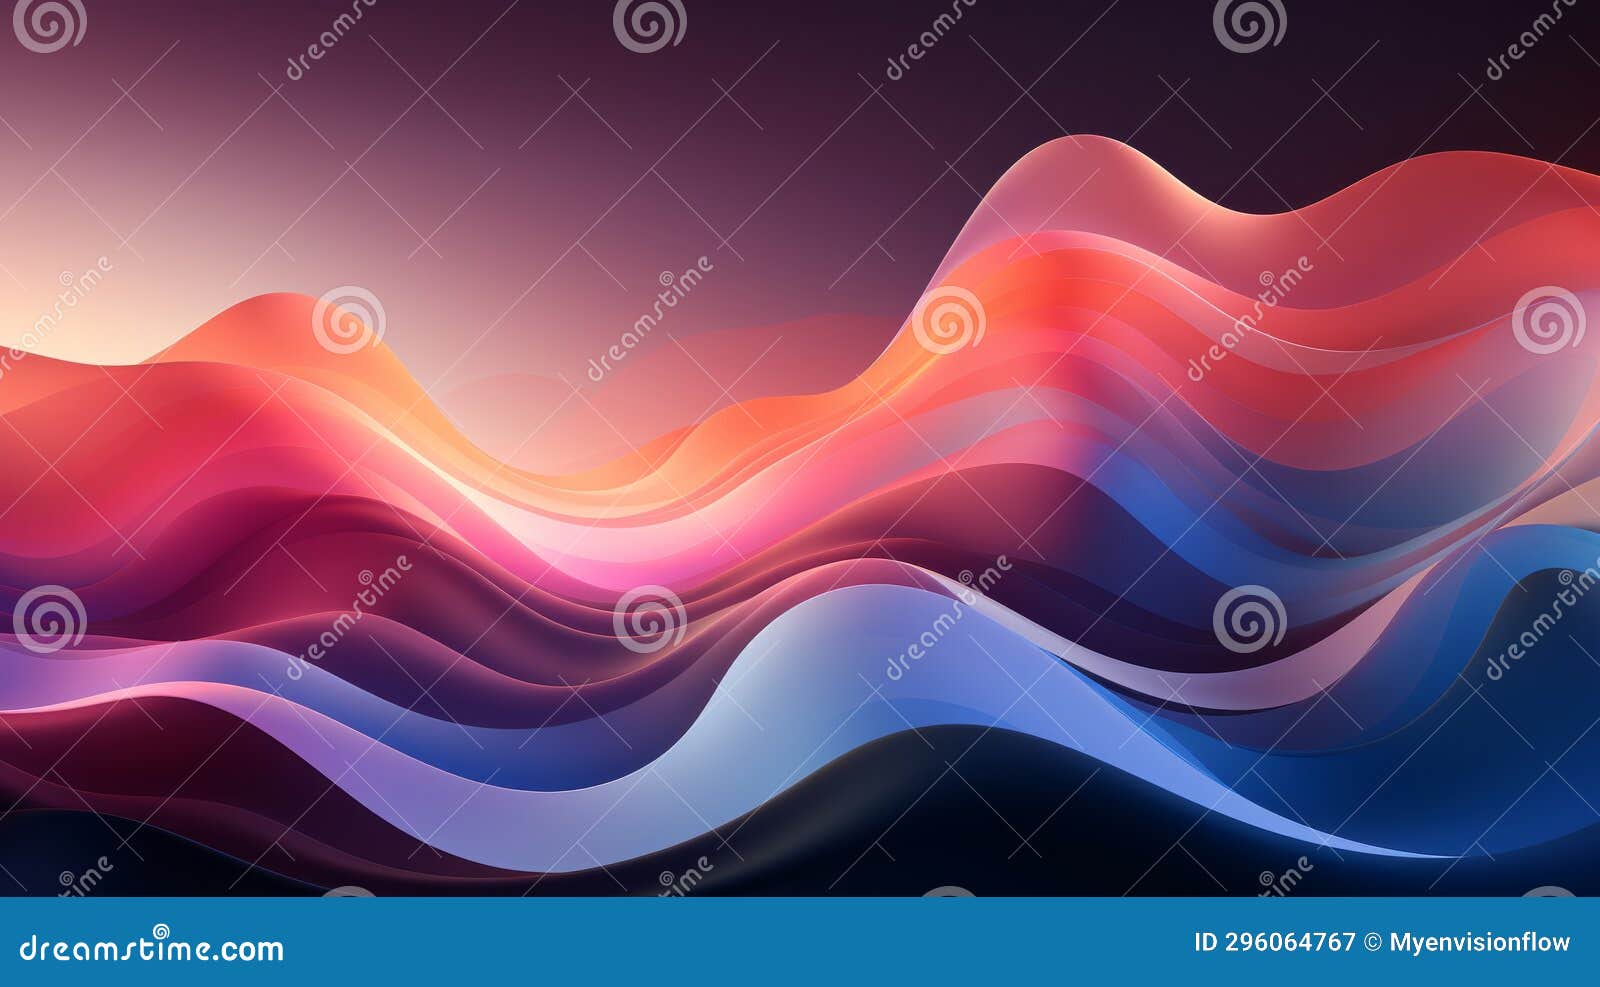 A Colorful Waves in a Dark Background Stock Illustration - Illustration ...